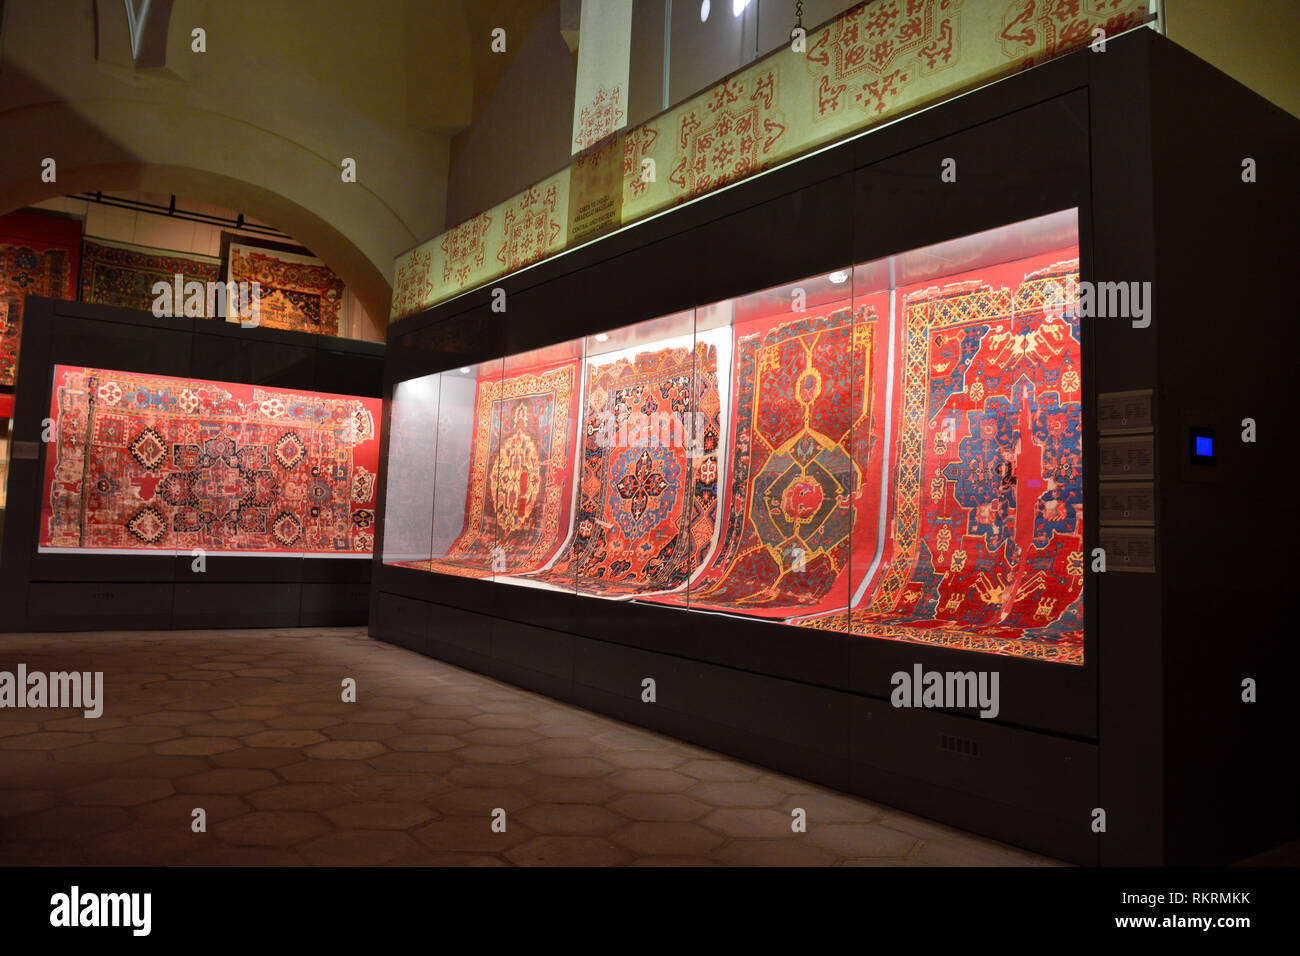 Istanbul, Turkey - April 23, 2017. Interior view of Carpet Museum in Istanbul, with ancient carpets on display. Stock Photo